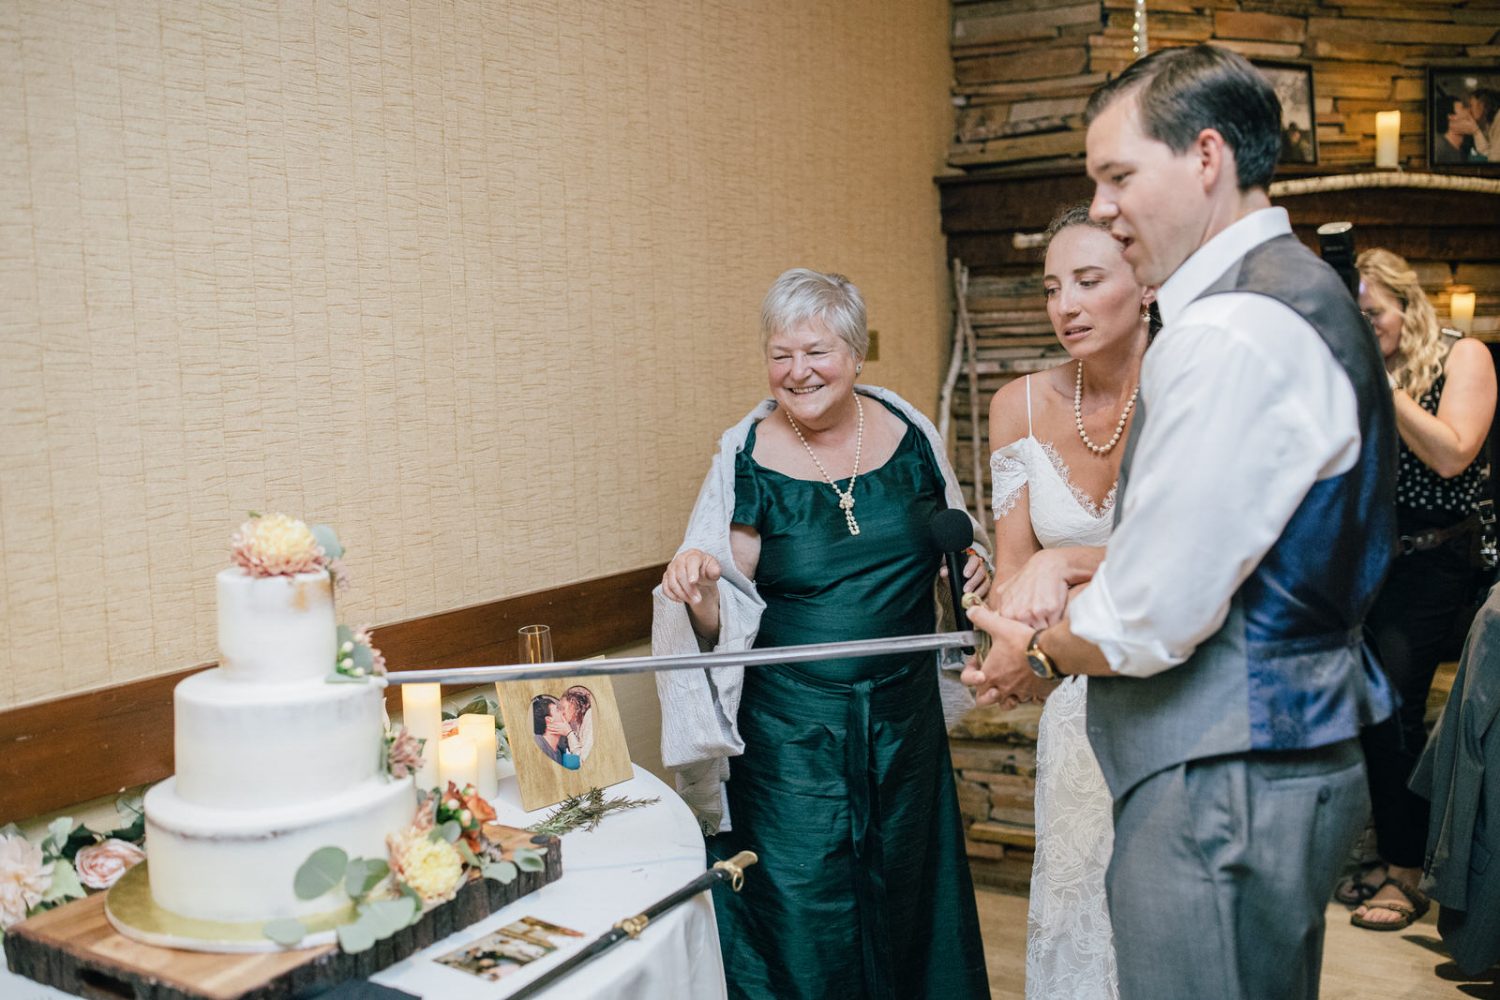 cake cutting with a sword